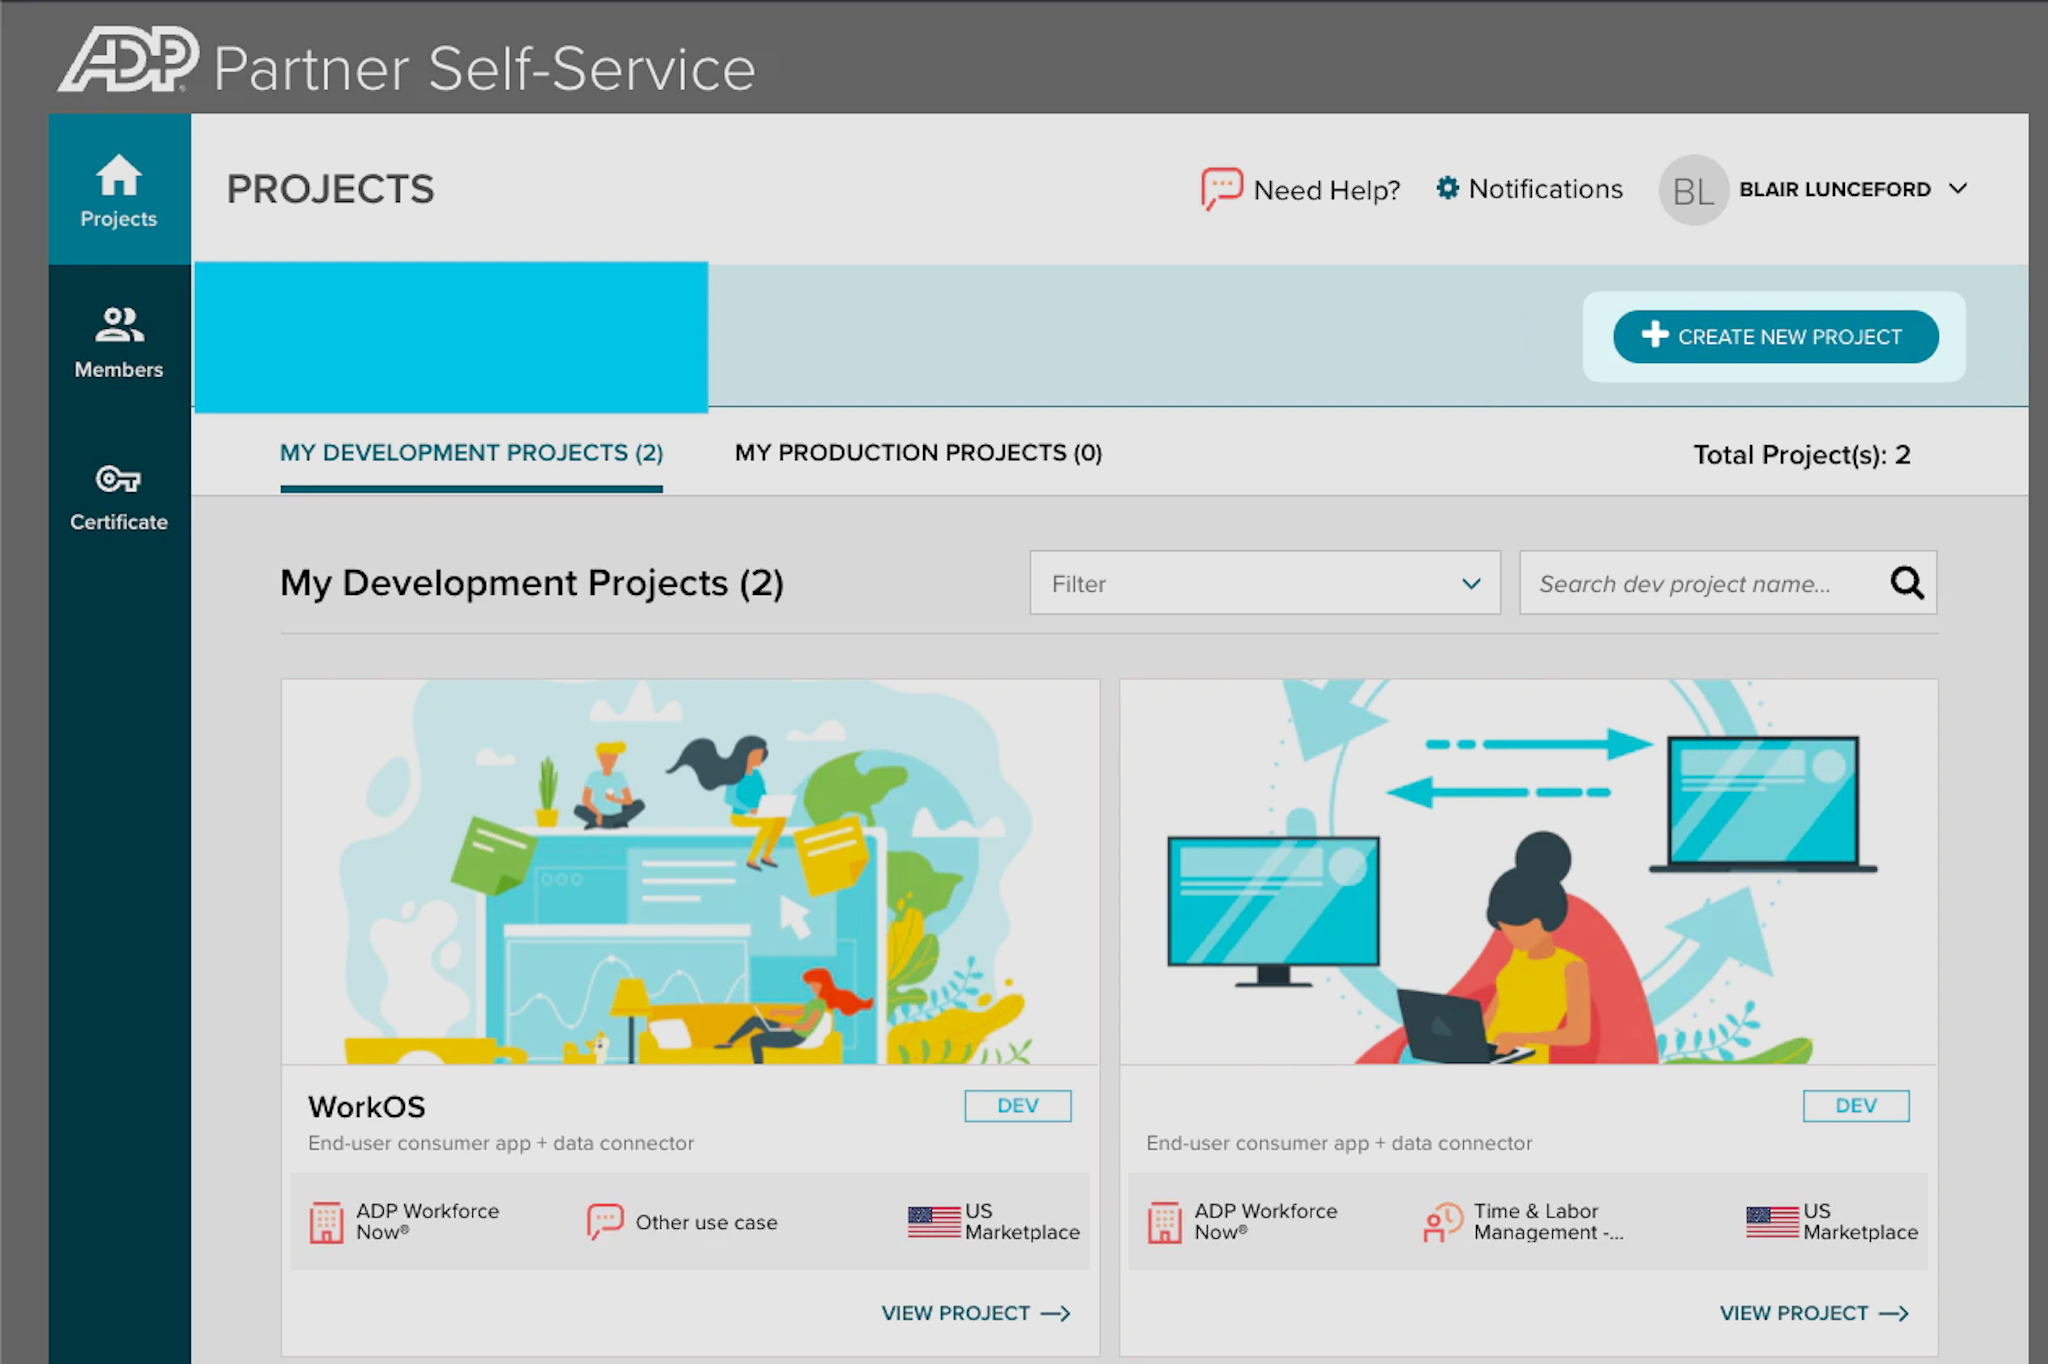 A screenshot showing the Projects Overview page in the ADP Partner Self Service Portal.